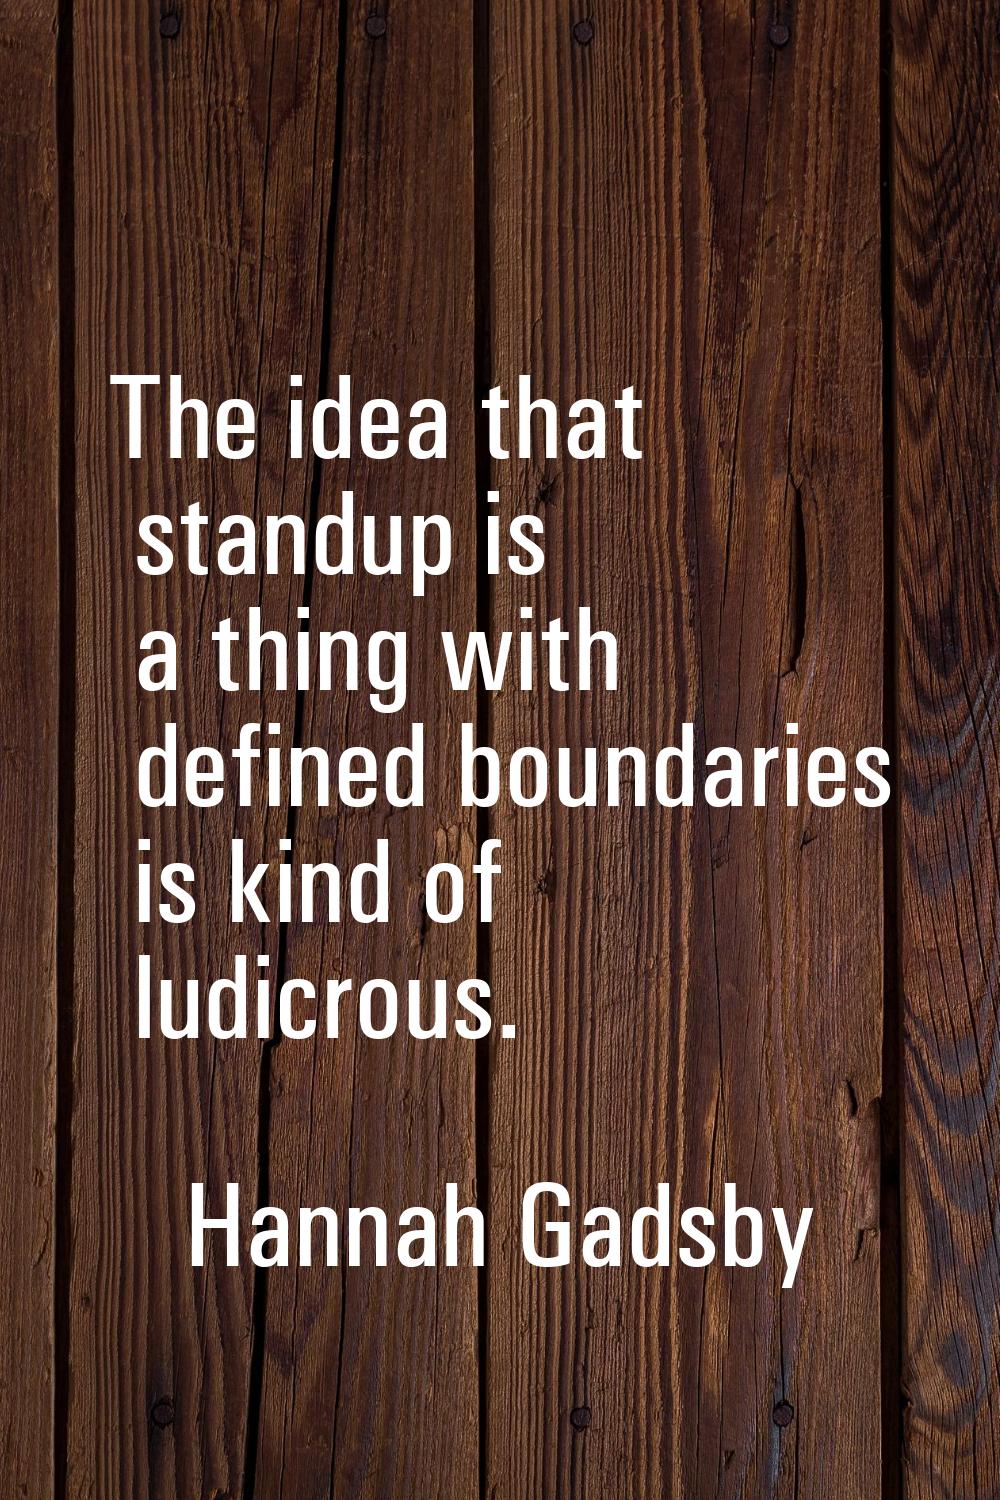 The idea that standup is a thing with defined boundaries is kind of ludicrous.